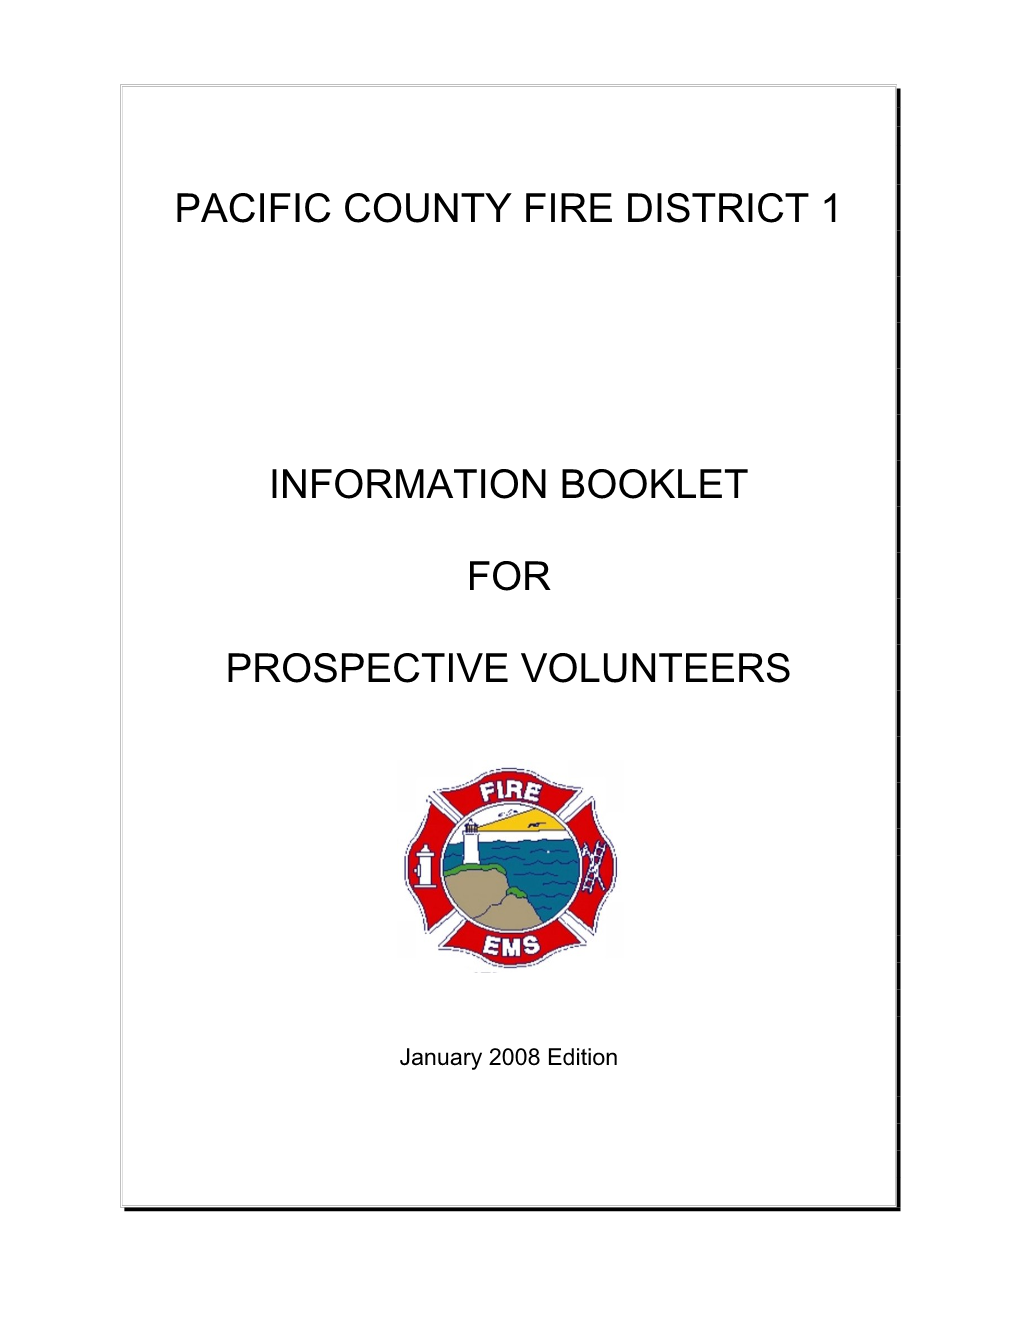 Pacific County Fire District No